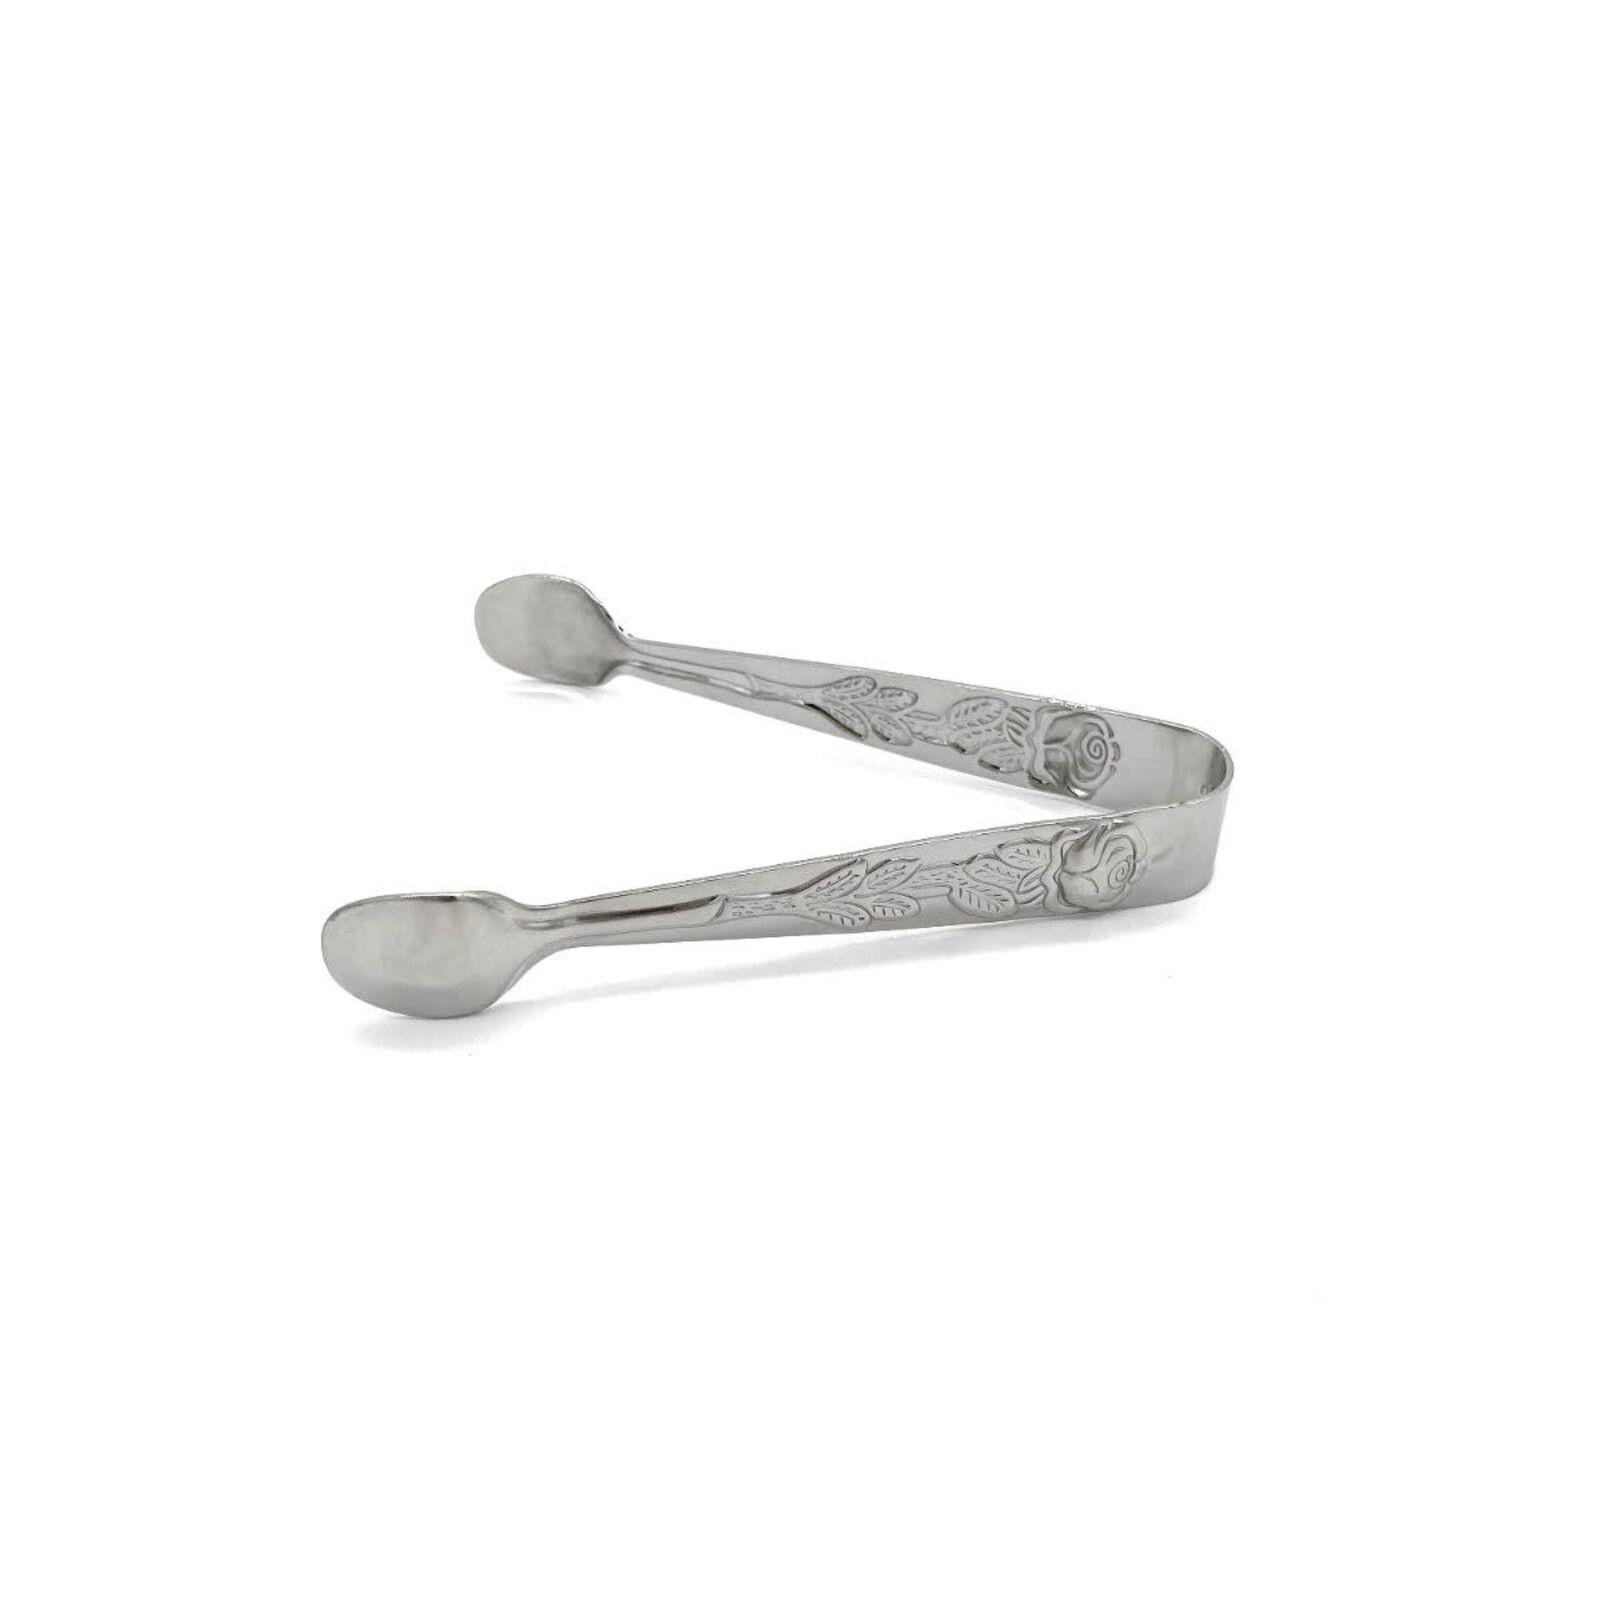 The Gallery Rose Handle Sugar Tong Stainless Steel (Silver) loading=